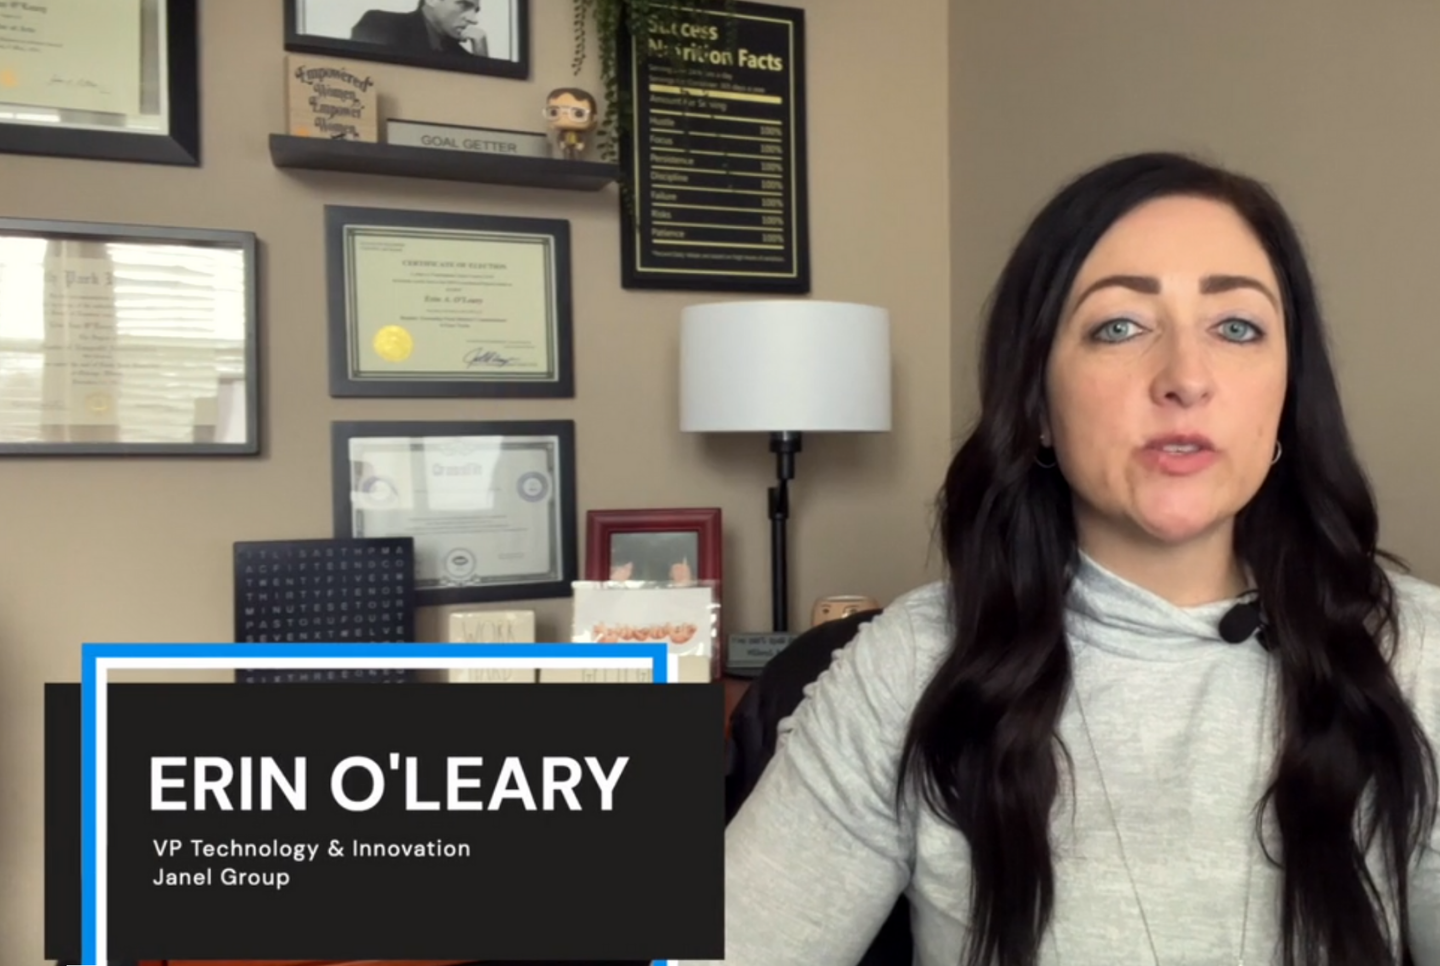 Erin O'Leary, VP of Technology and Innovation for Janel Group, shares her experience with Chain.io's cloud-based integration services.